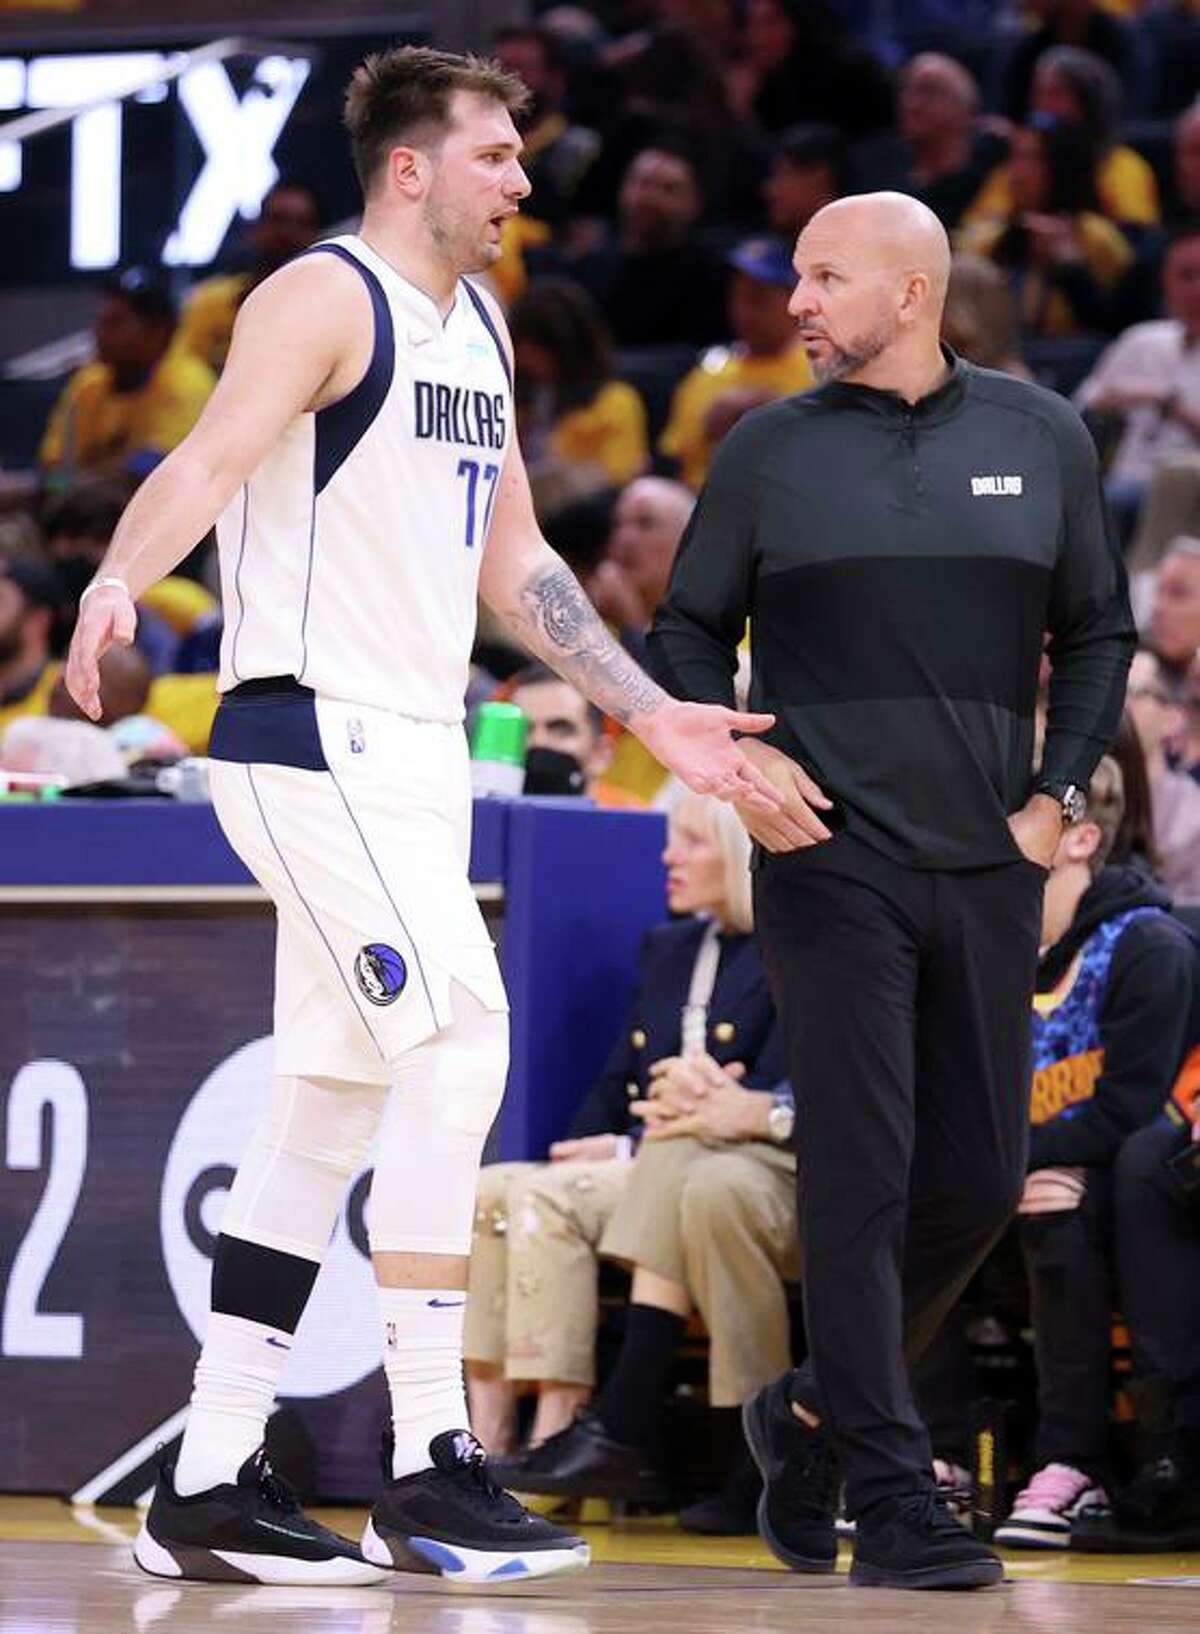 Dallas Mavericks guard Luka Doncic complains as he walks past head coach Jason Kidd during Game 1 of the Western Conference finals on Wednesday night.